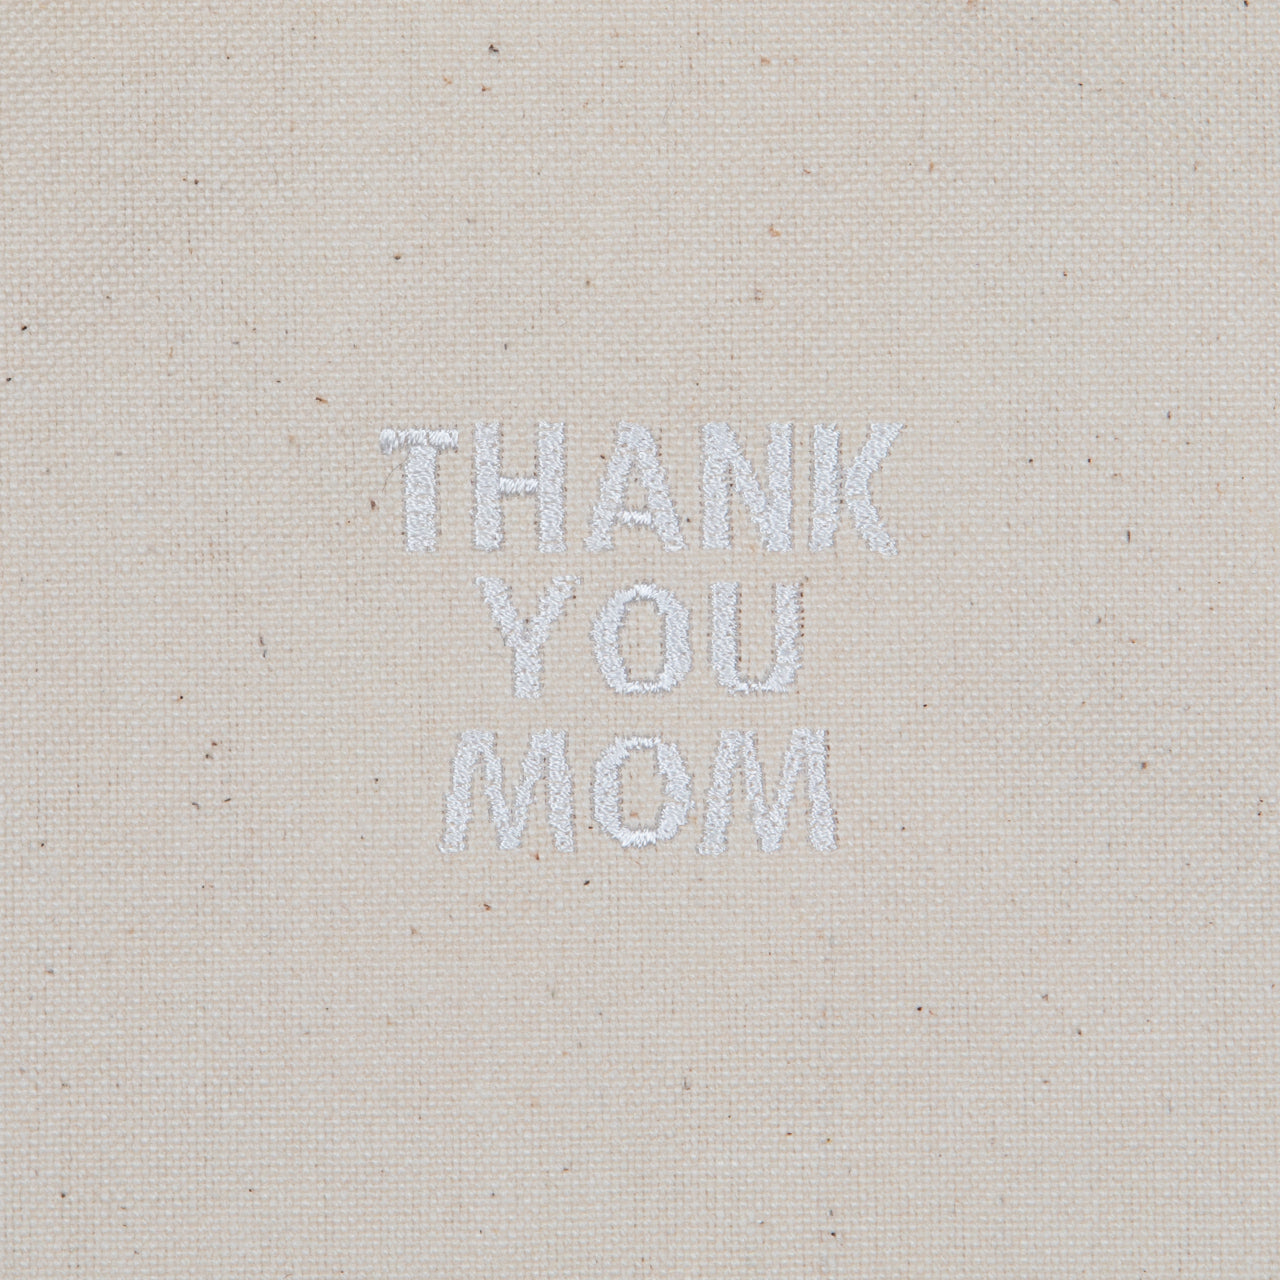 EMBROIDERY ICON [THANK YOU MOM]